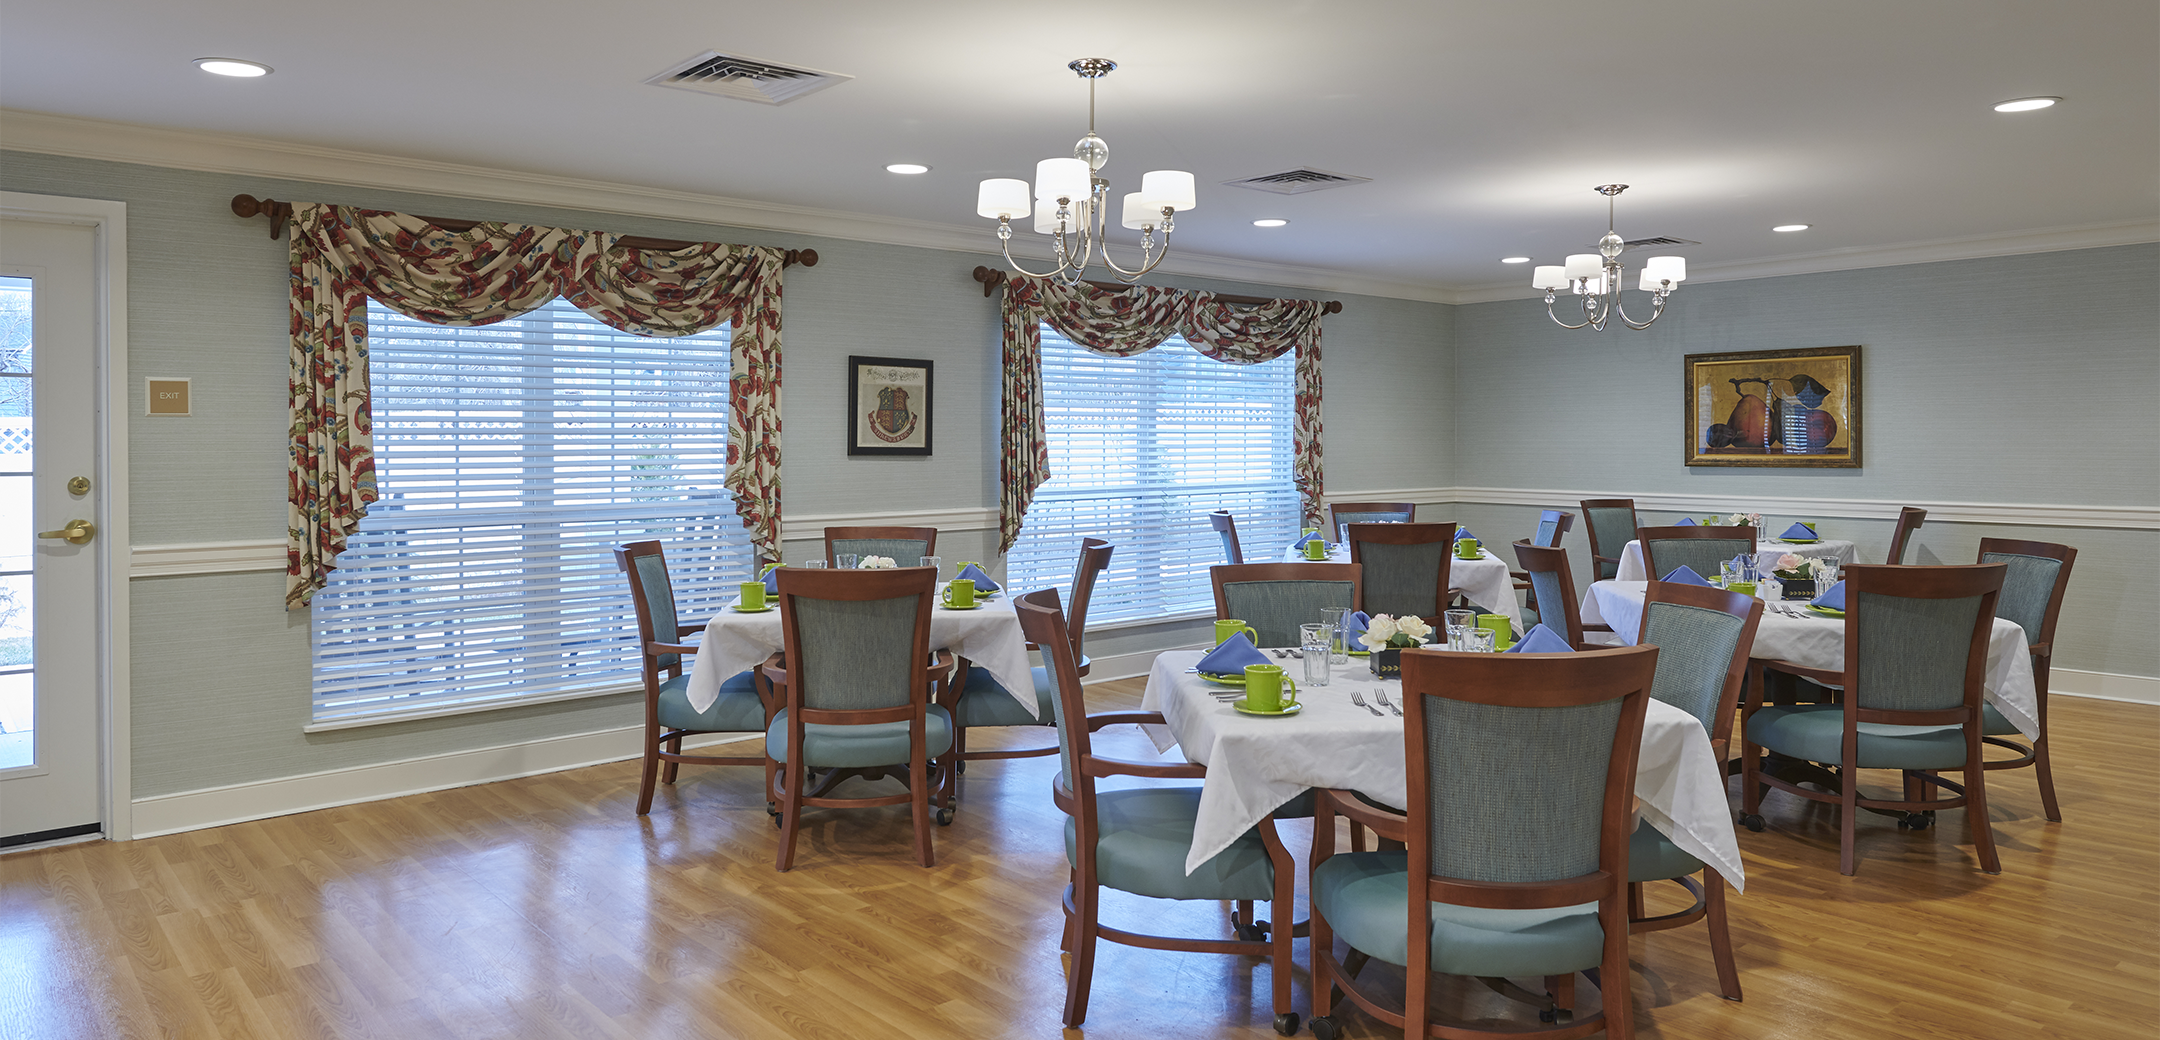 An interior view of the Artis Senior Living dining area with five tables and light blue cushioned chairs and wooden flooring.